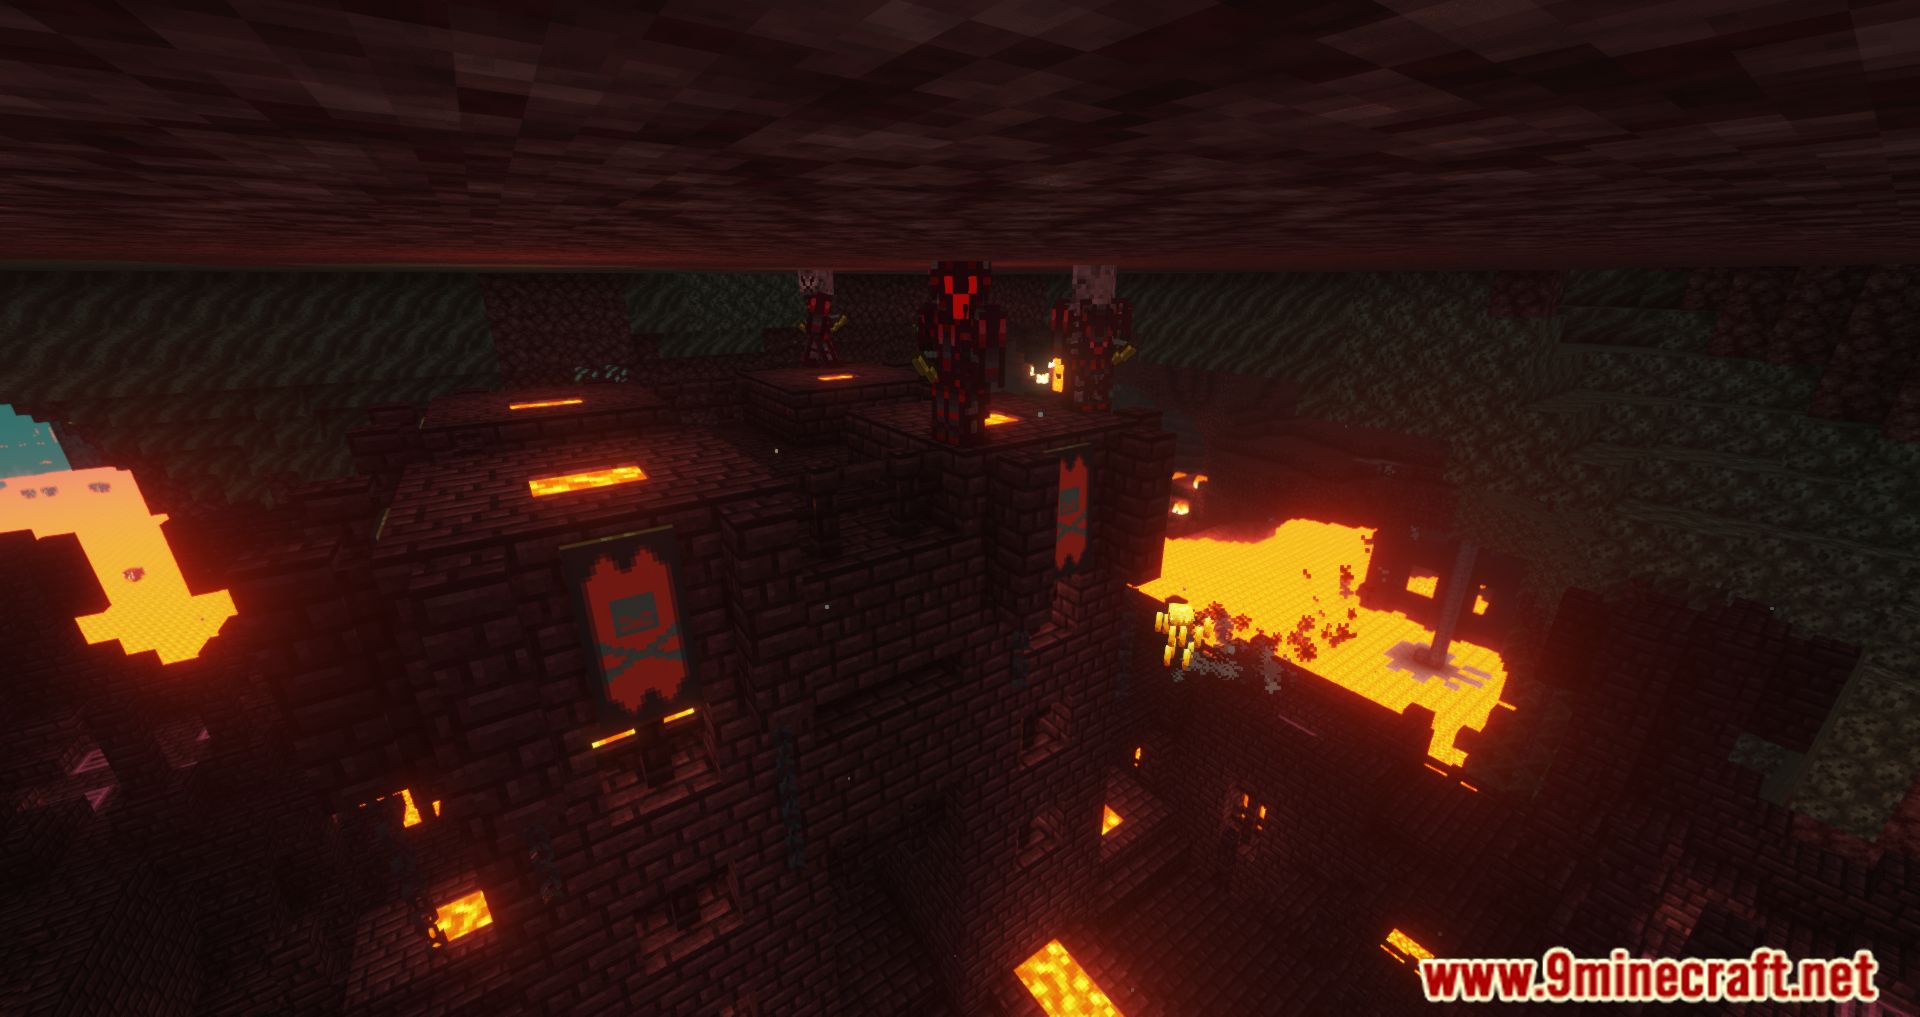 Nether Hexed Kingdom Mod (1.16.5, 1.12.2) - New Structures And Creatures For The Nether 21